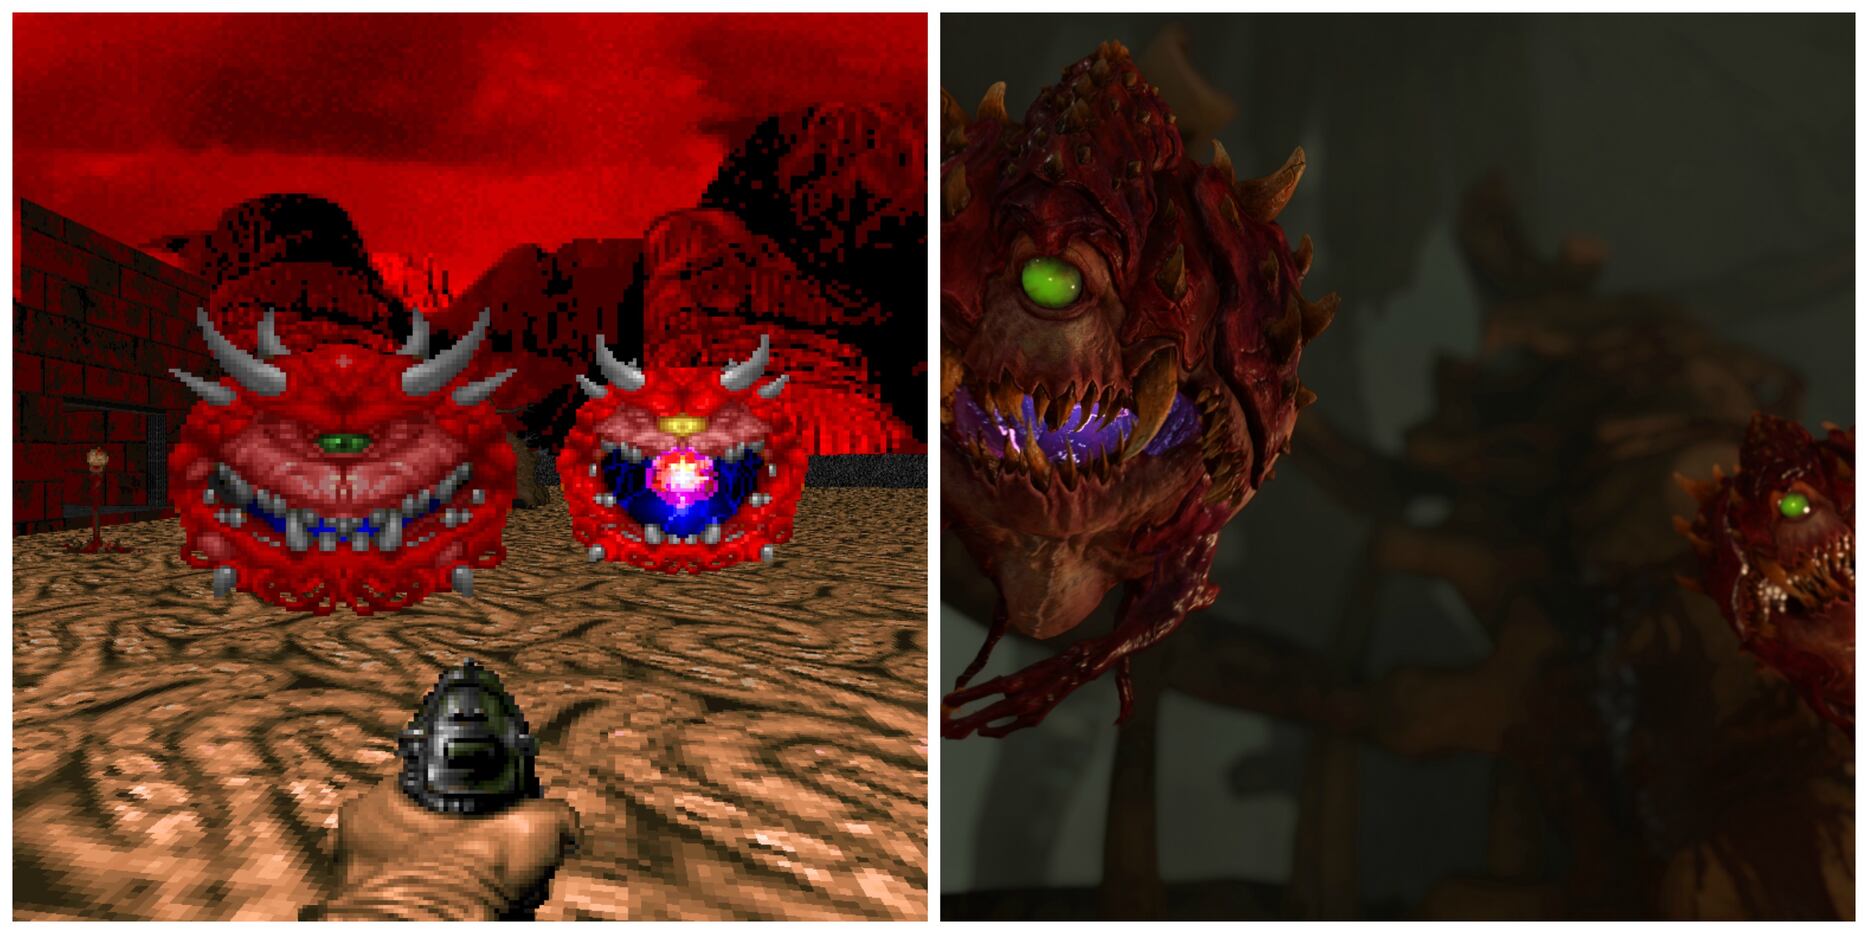 Left: Cacodemons then. Right: Cacodemons now